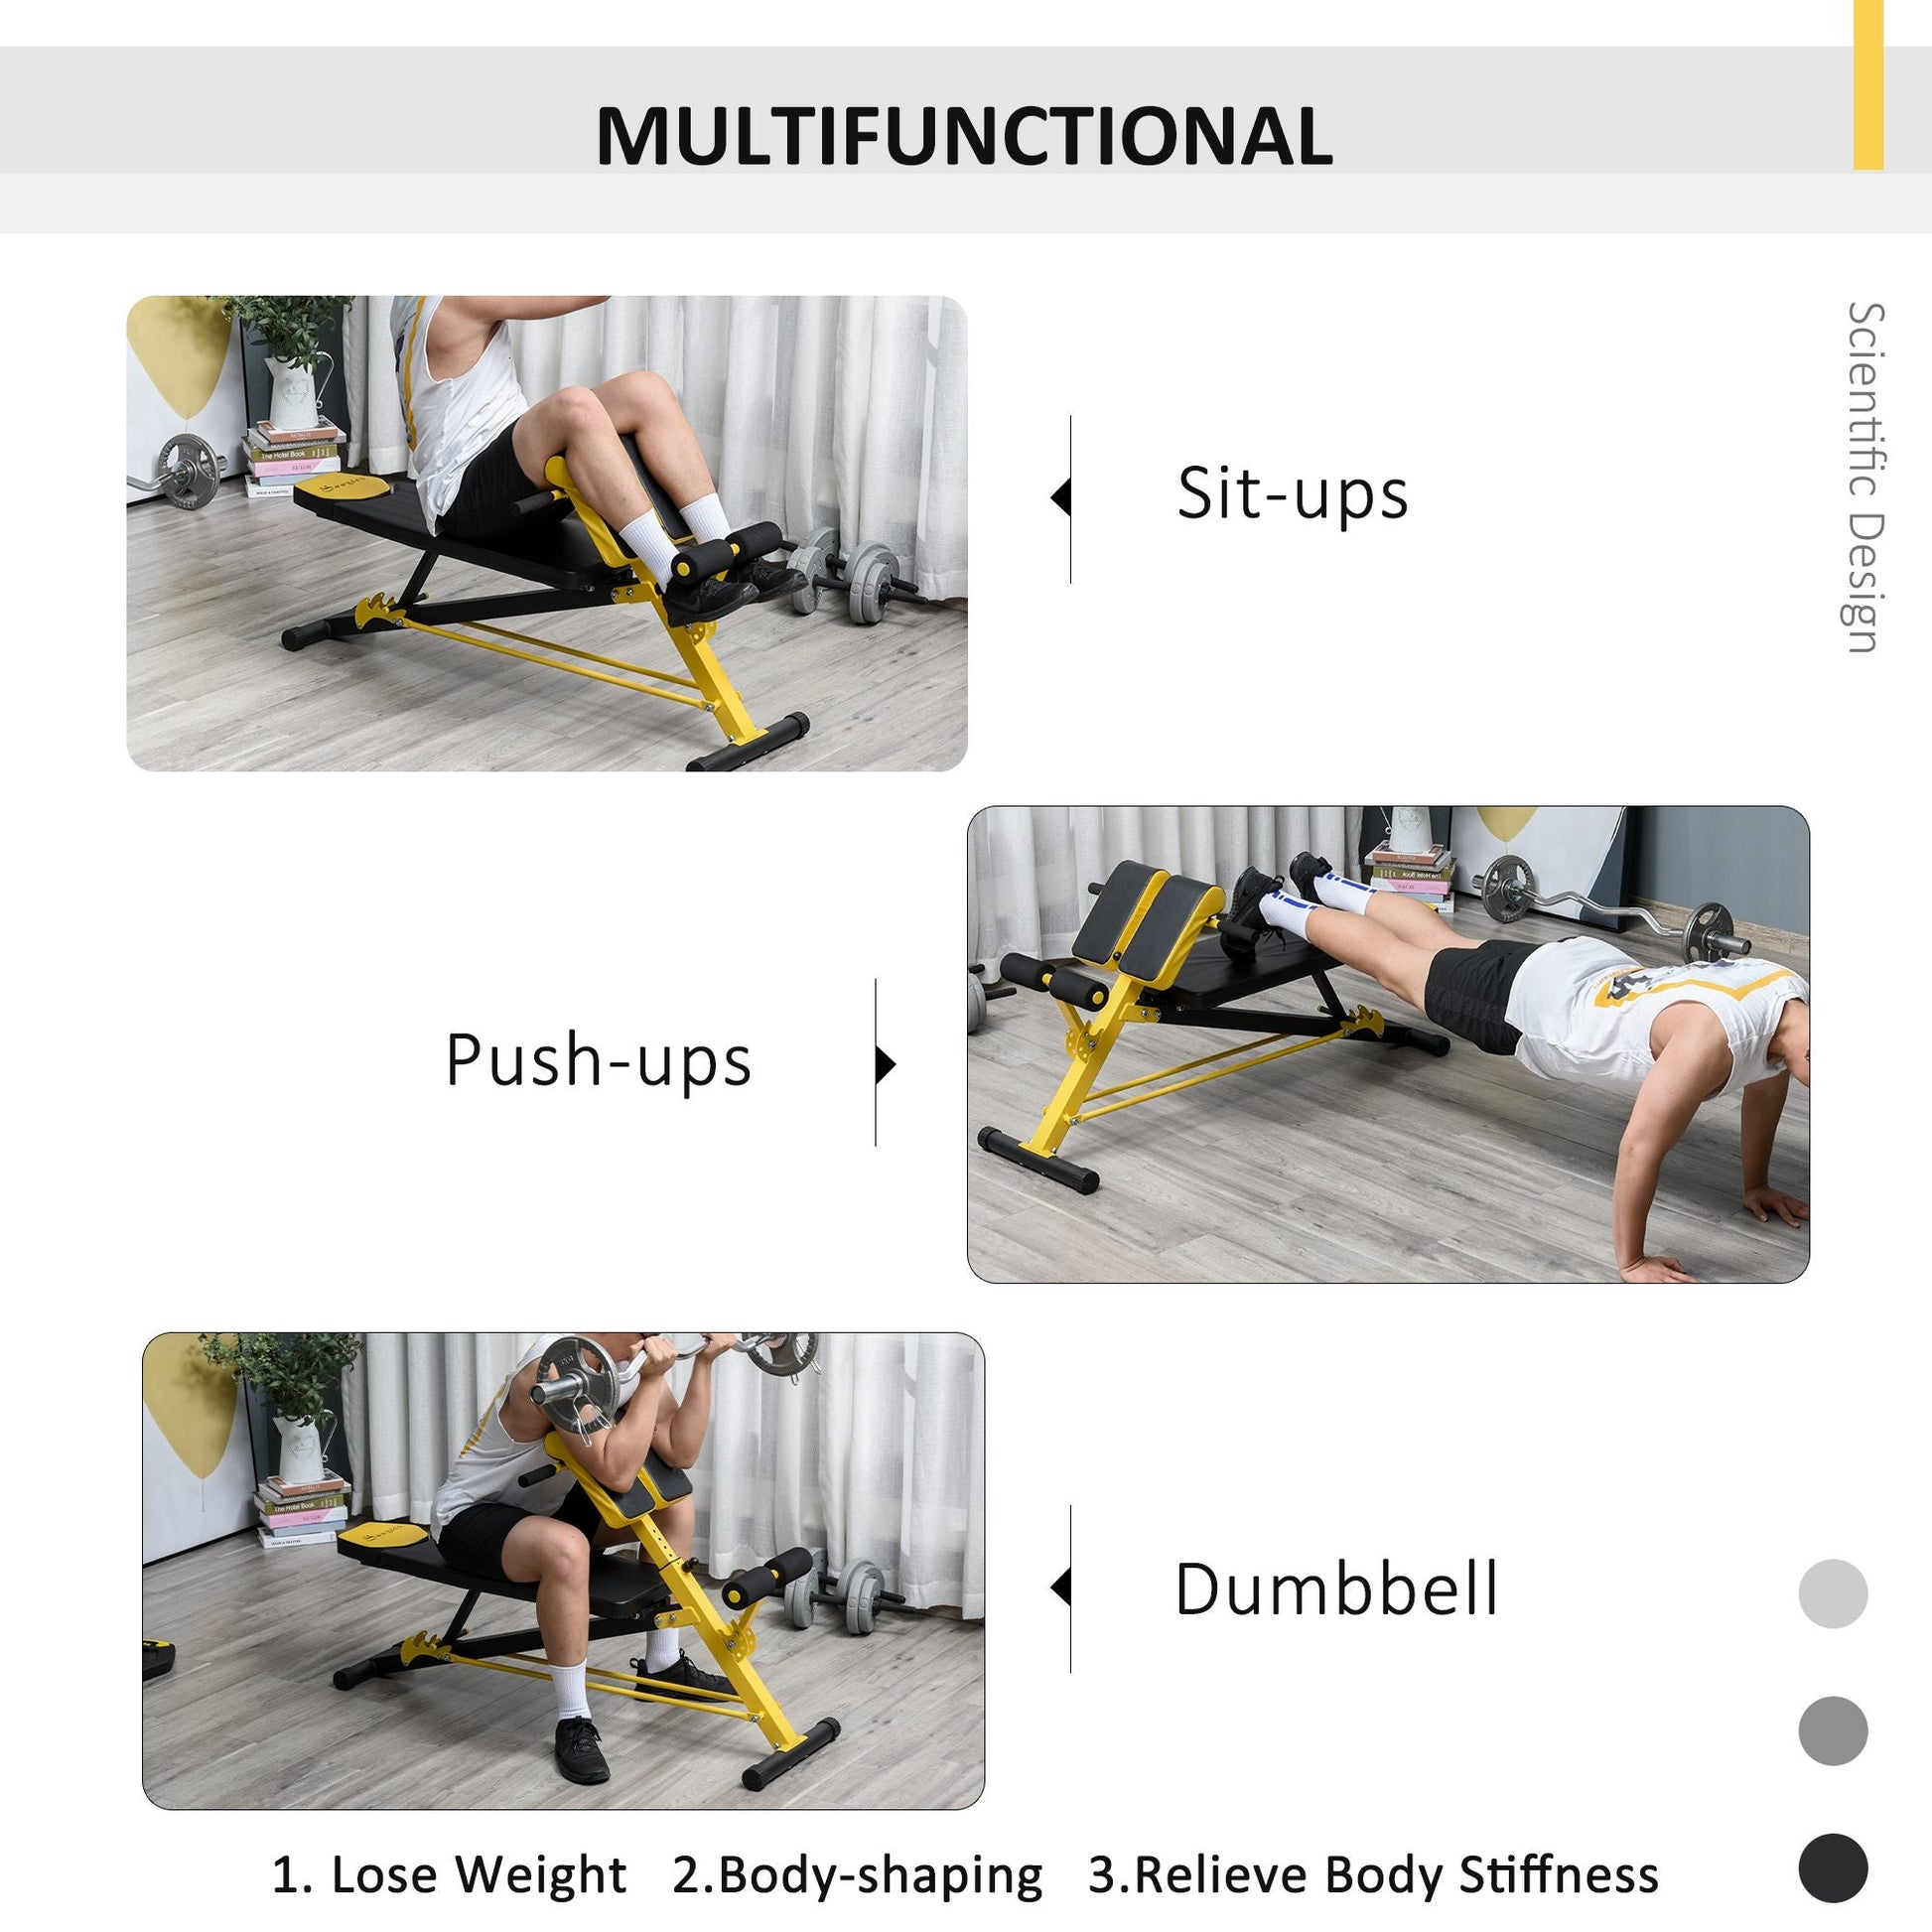 Adjustable Weight Bench Roman Chair Exercise Training Multi-Functional Hyper Extension Bench Dumbbell Bench Ab Sit up Decline Flat Black and Yellow at Gallery Canada